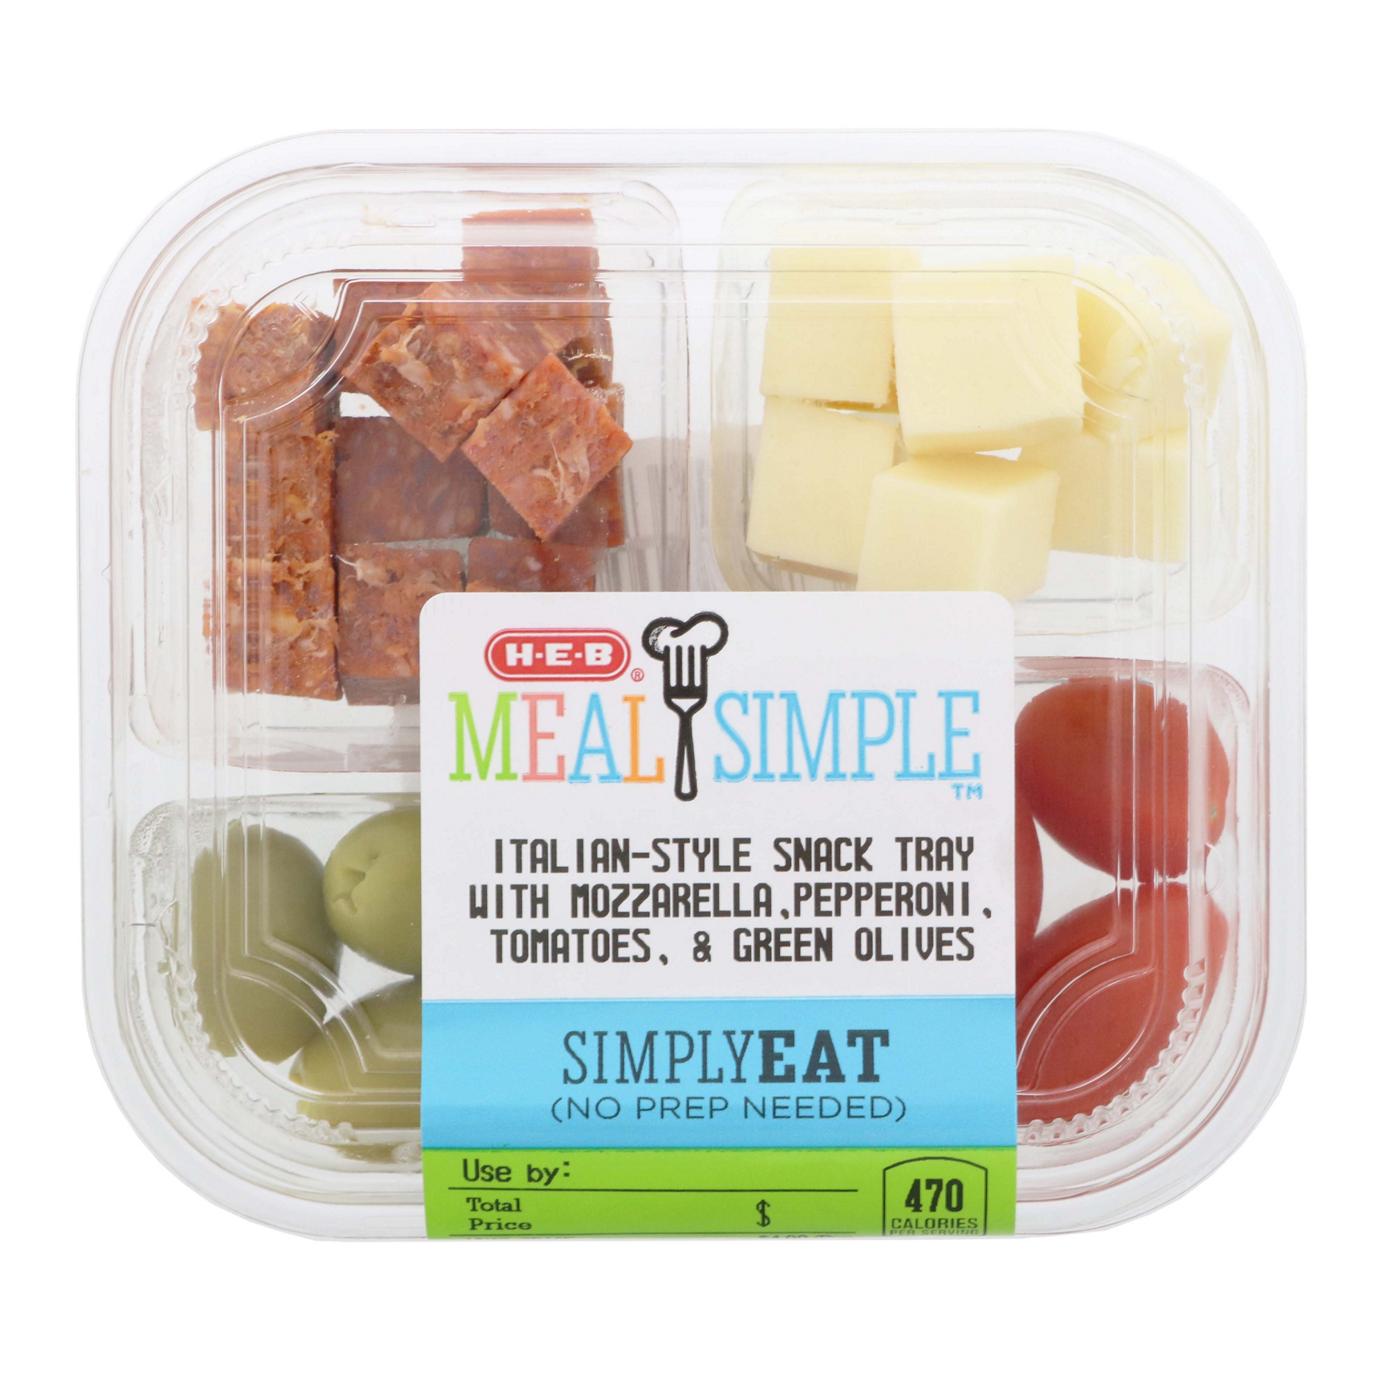 Meal Simple by H-E-B Snack Tray - Italian Style with Pepperoni, Cheese, Tomatoes & Olives; image 2 of 4